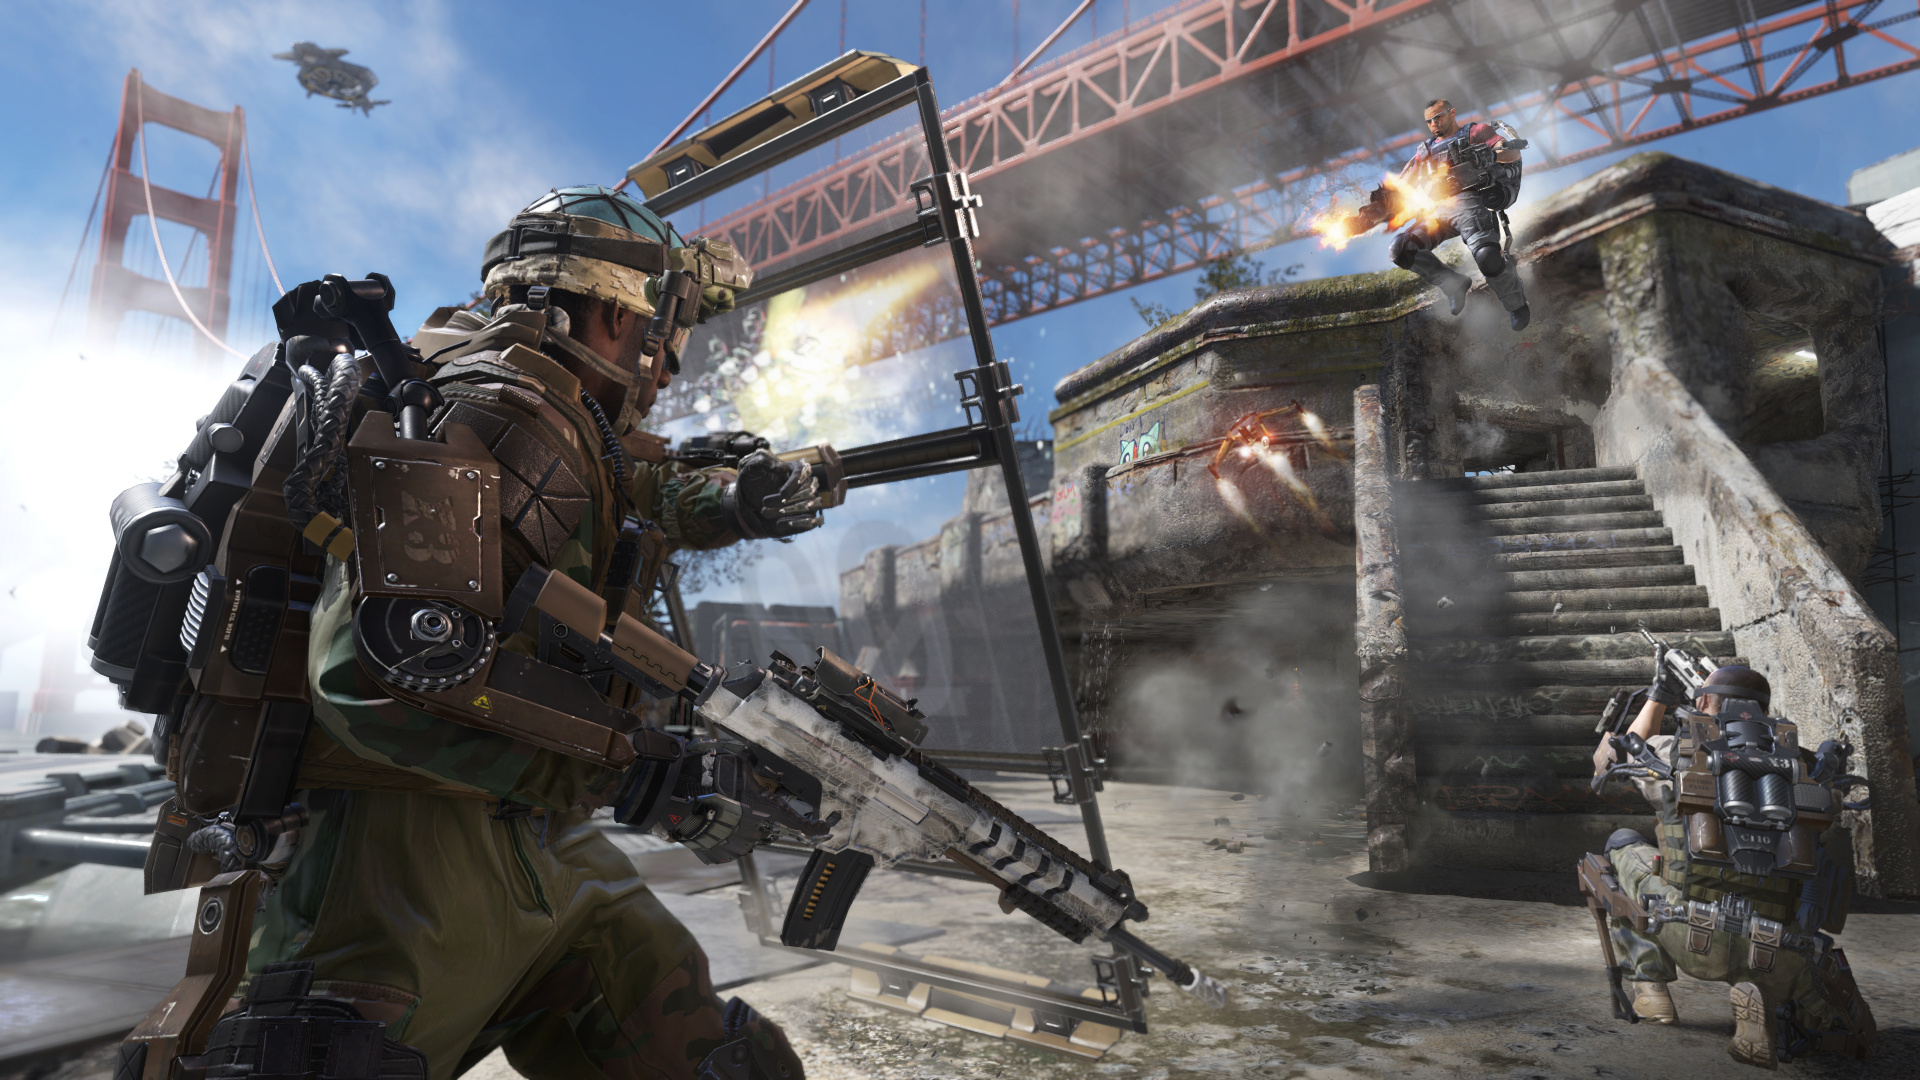 Call of Duty Advanced Warfare, Multiplayer Video Game, pc Game, Soldier, Military. Wallpaper in 1920x1080 Resolution